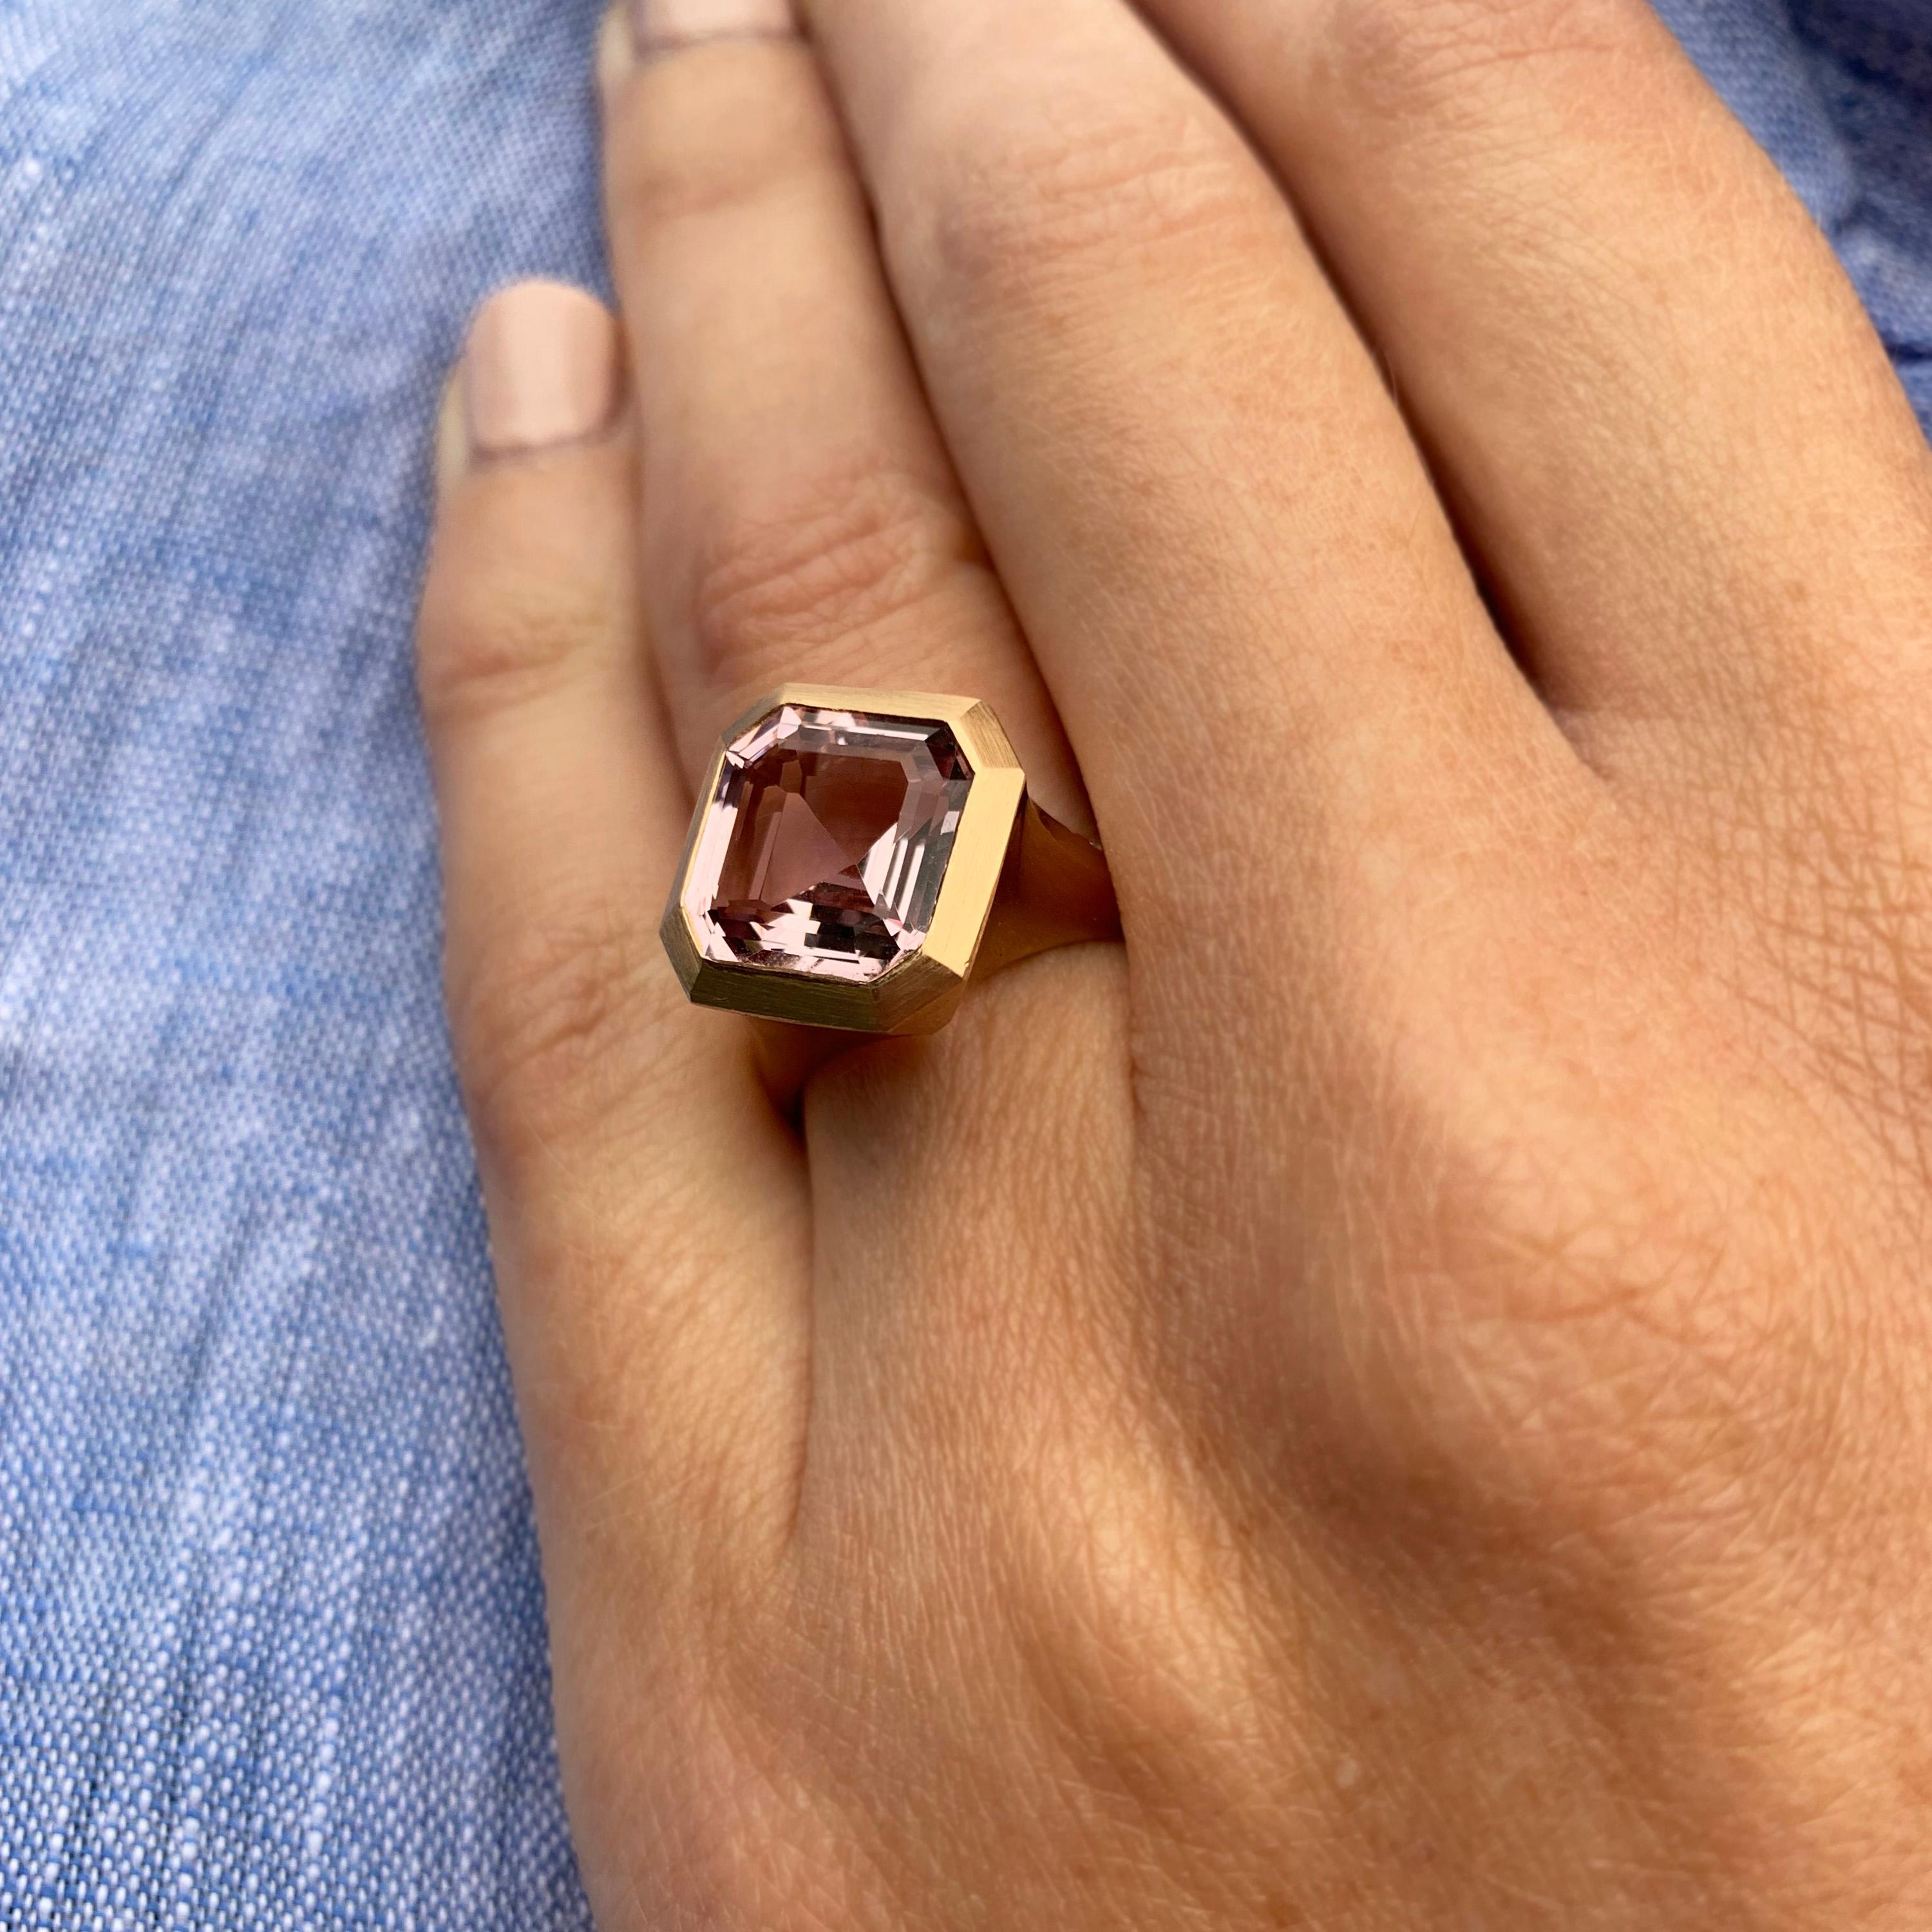 A true statement ring handmade from 18 karat rose gold, a beautiful vibrant soft pink morganite in a step cut or asscher style is perfectly bezel set into this impressive ring. One wall of this piece is set with stunning white diamonds so you can